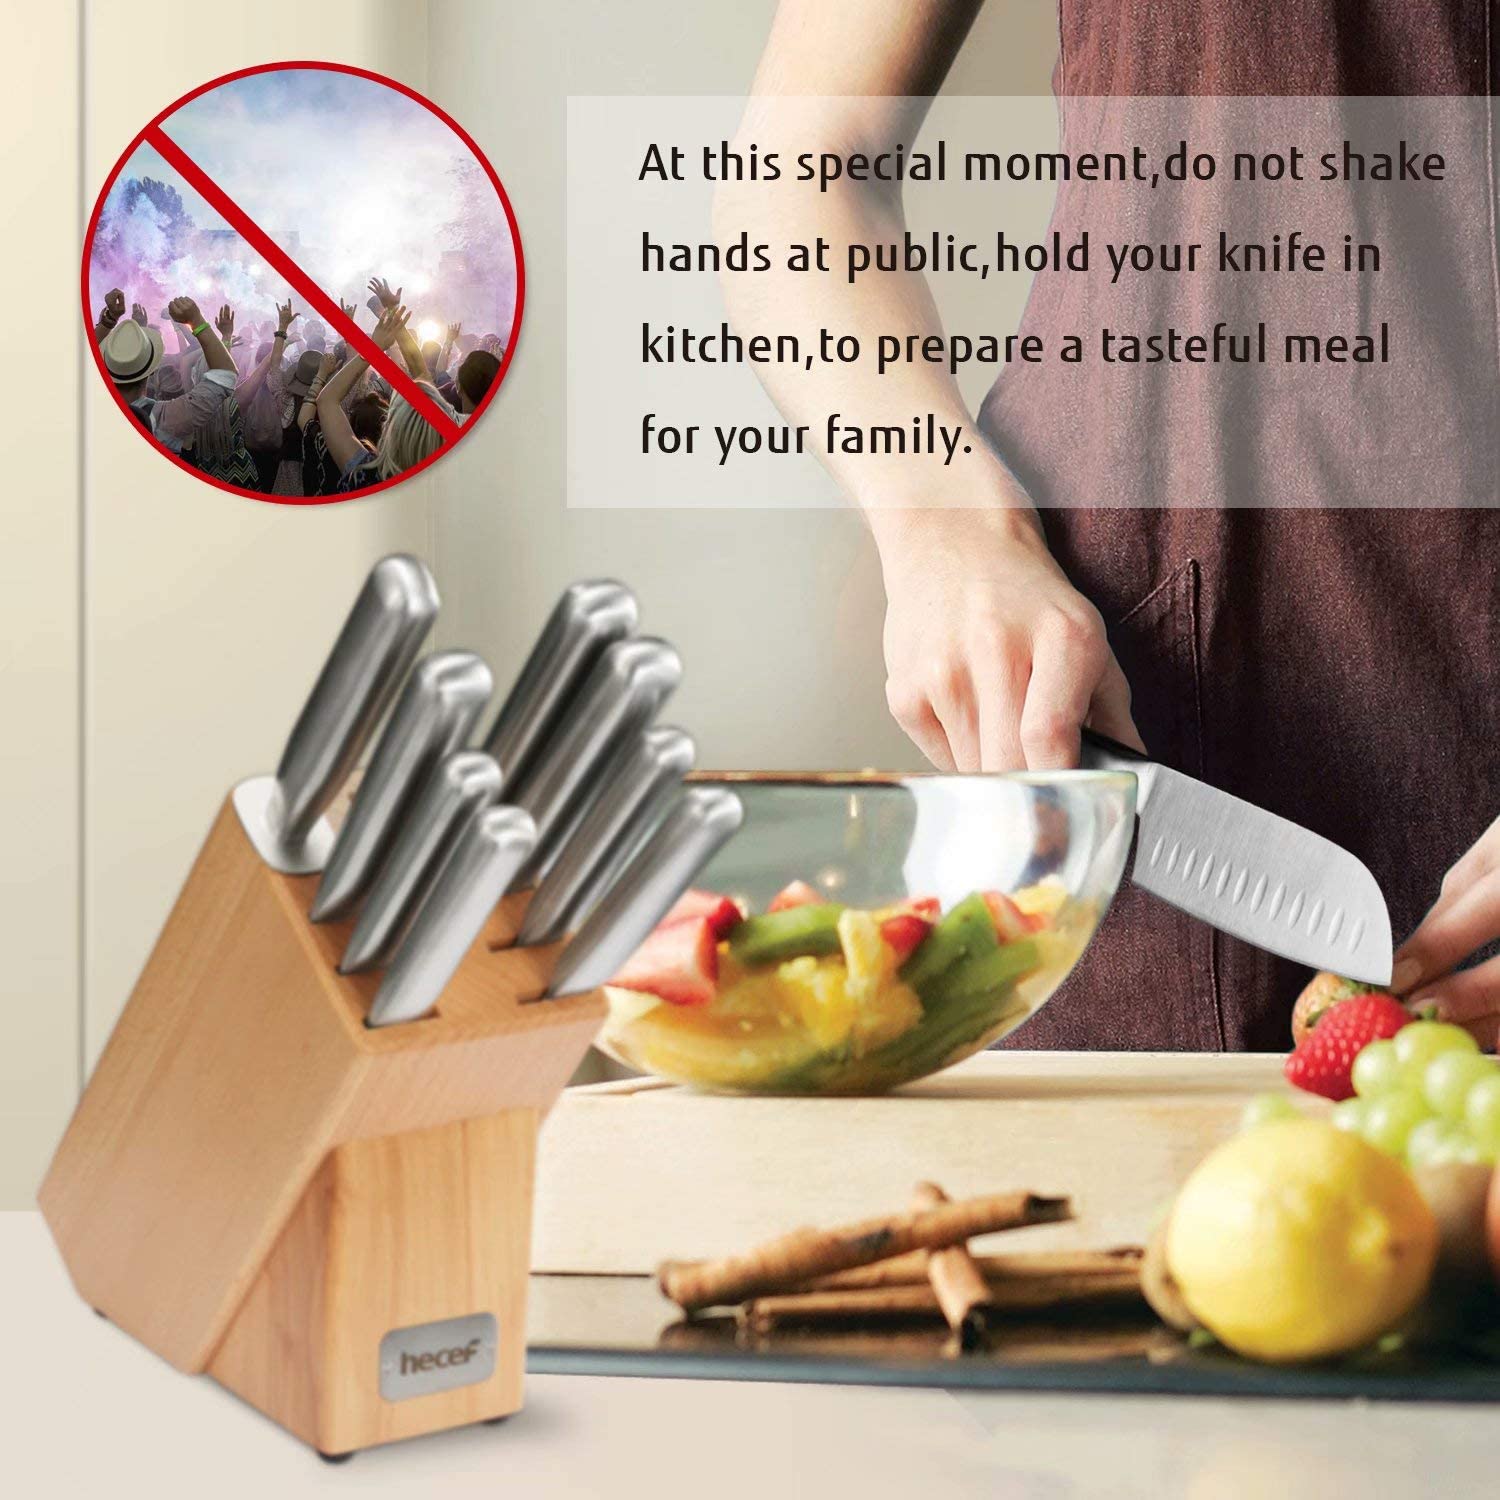 Hecef Kitchen Knife Block Set, 14 Pieces Knife Set with Wooden Block 